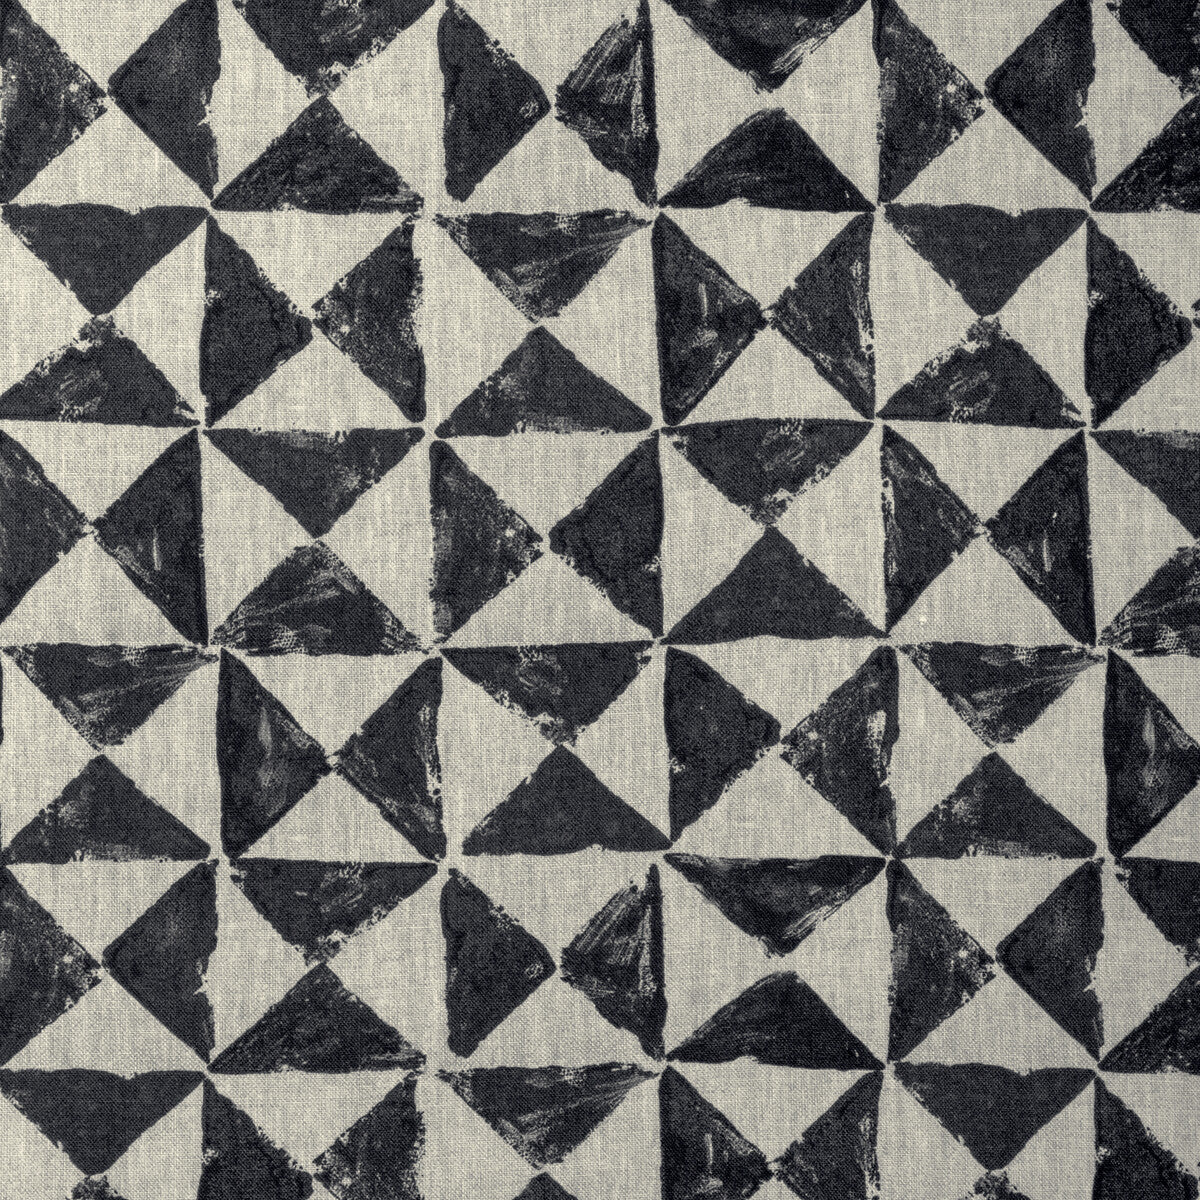 Triquad fabric in granite color - pattern TRIQUAD.81.0 - by Kravet Basics in the Small Scale Prints collection